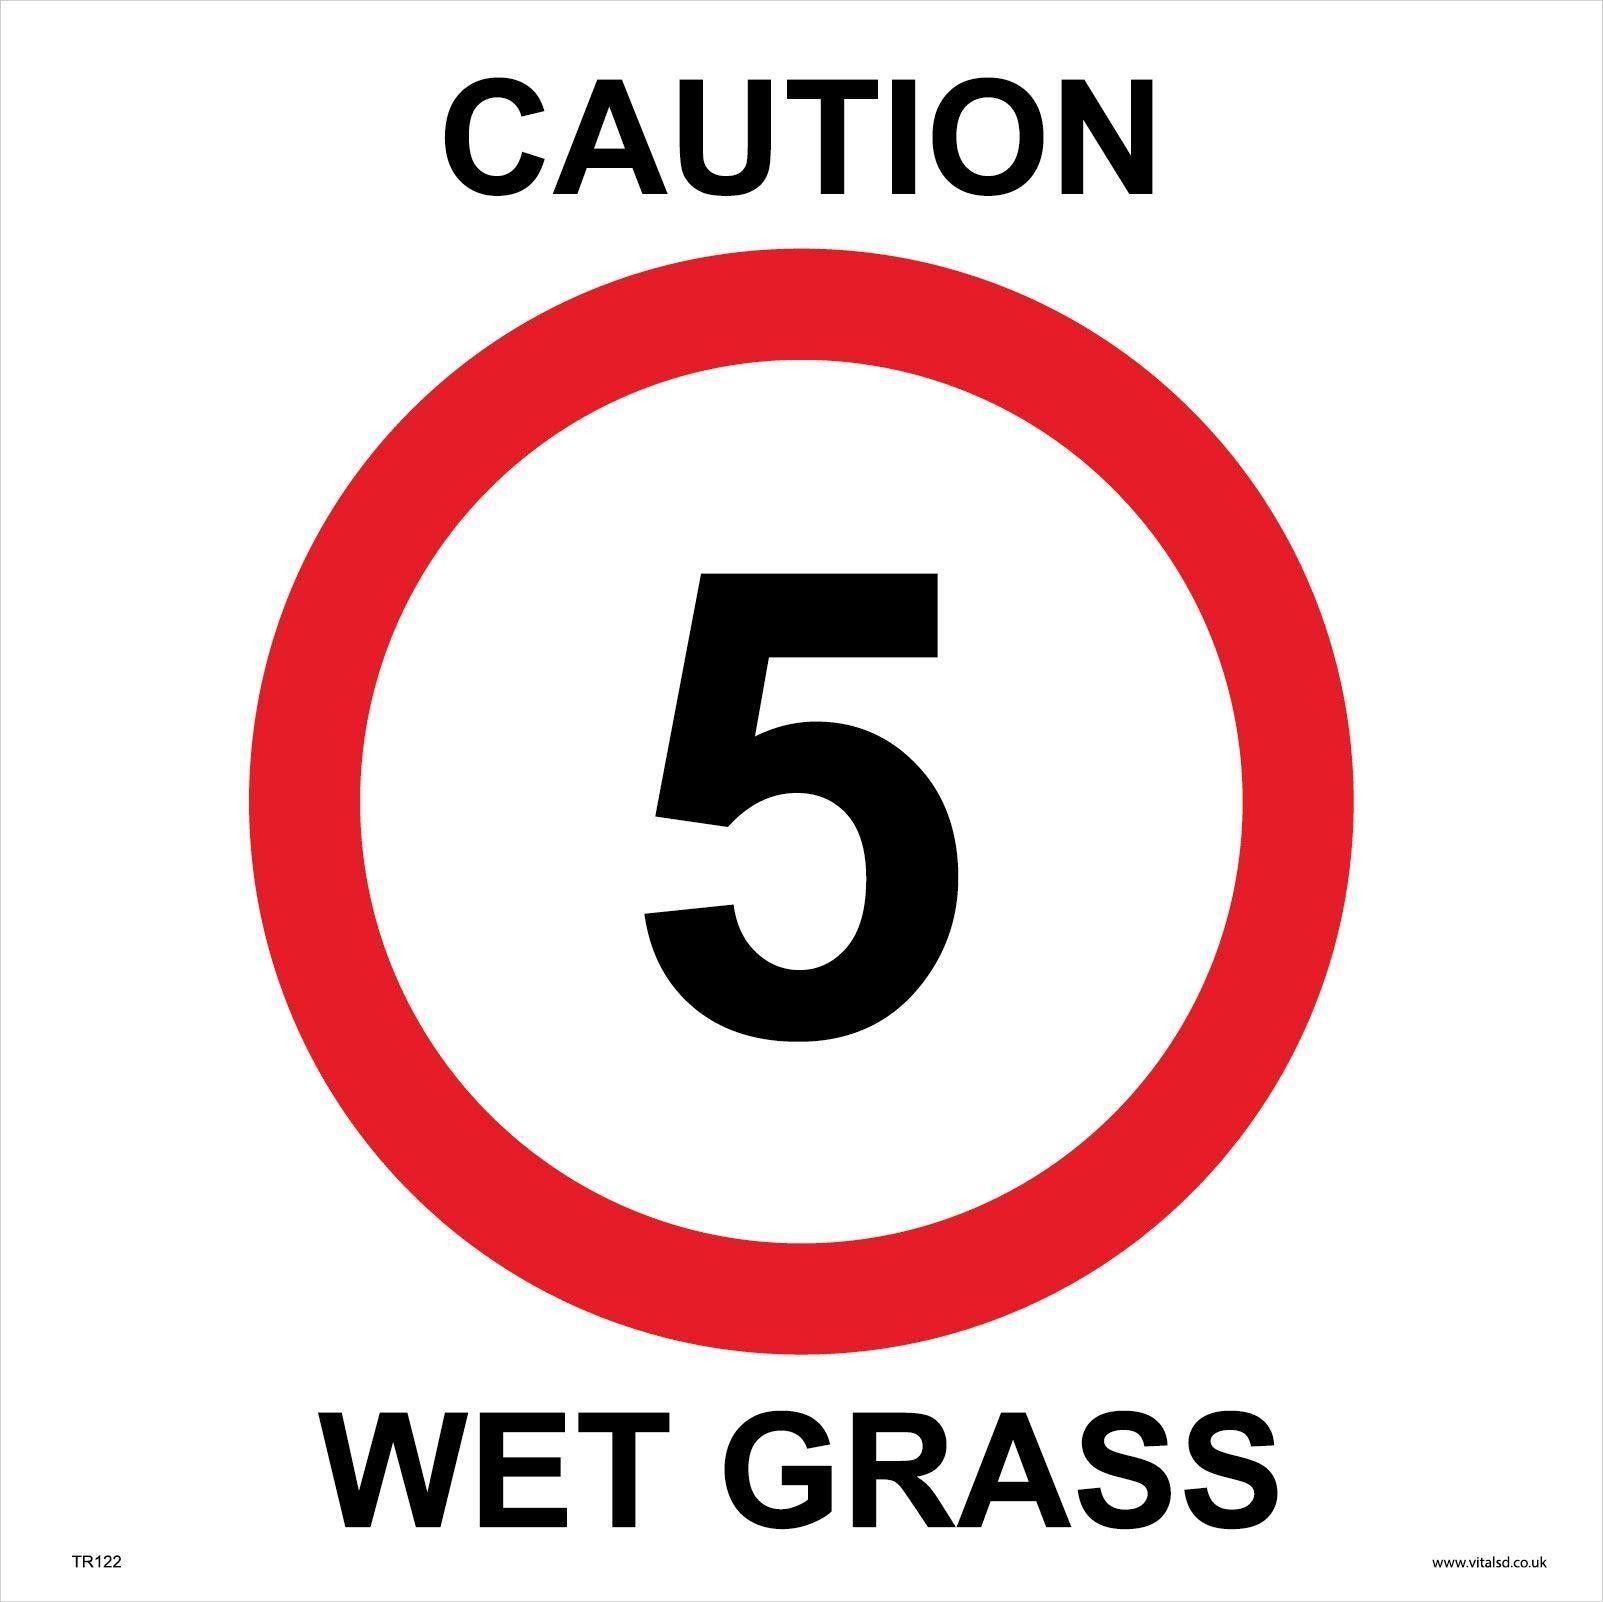 White with Red Circle X Logo - TR122 00 0600 0600 Caution Wet Grass 5Mph Sign 600 X 600mm X 24